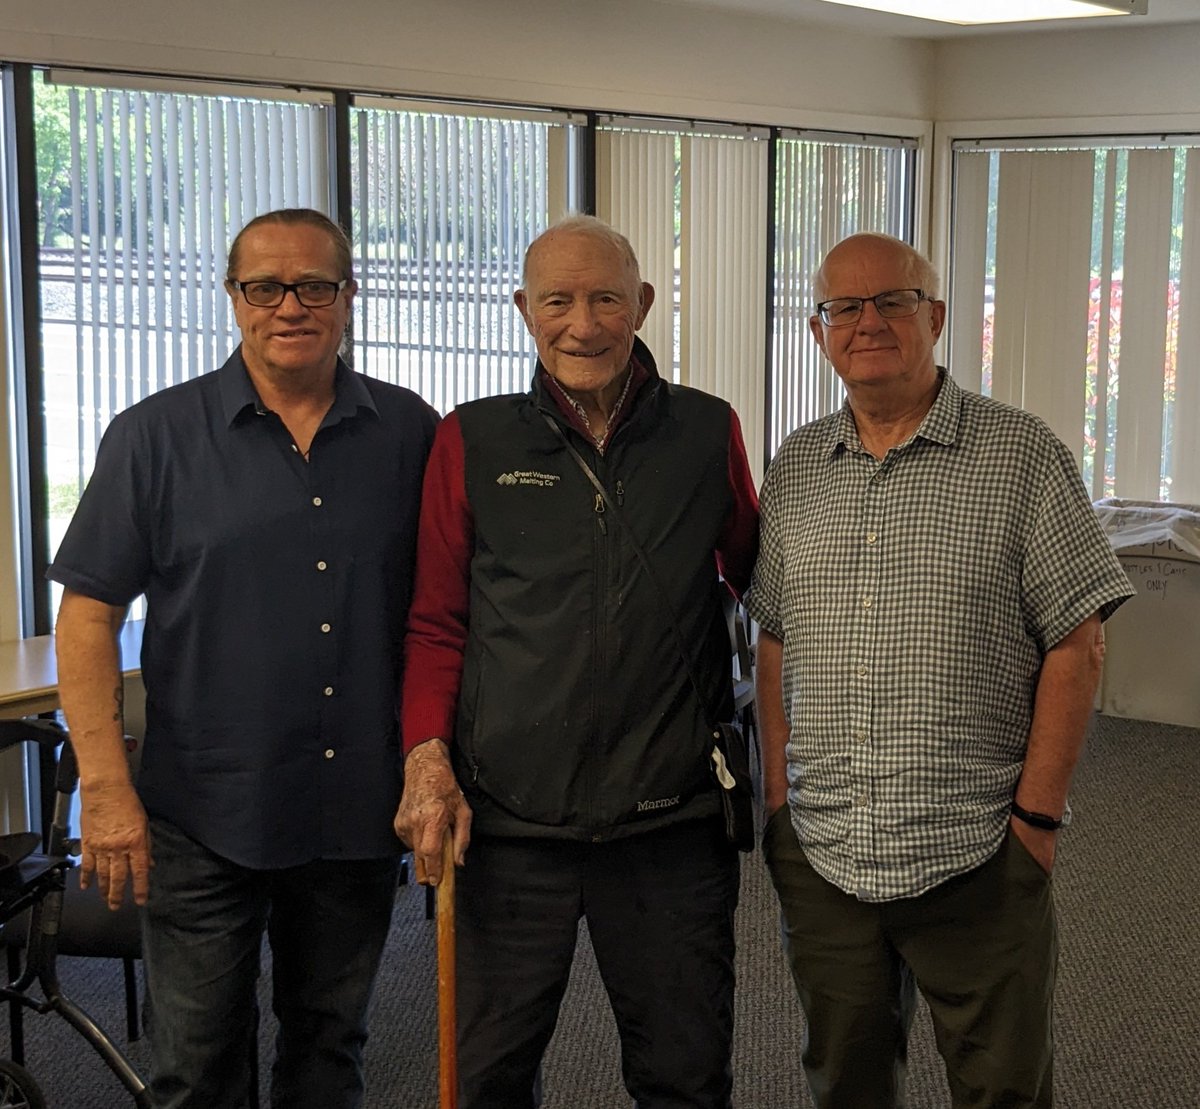 A little bit of history today. Three UC Davis Professors of Brewing Science. Center is the 1st Prof, Dr Michael Lewis, early 1960s to 1995, Right is 2nd Prof, Dr Charlie Bamforth, 1999 to 2018. Left is the 3rd Prof, Dr Glen Fox, 2019 to present. 🍻